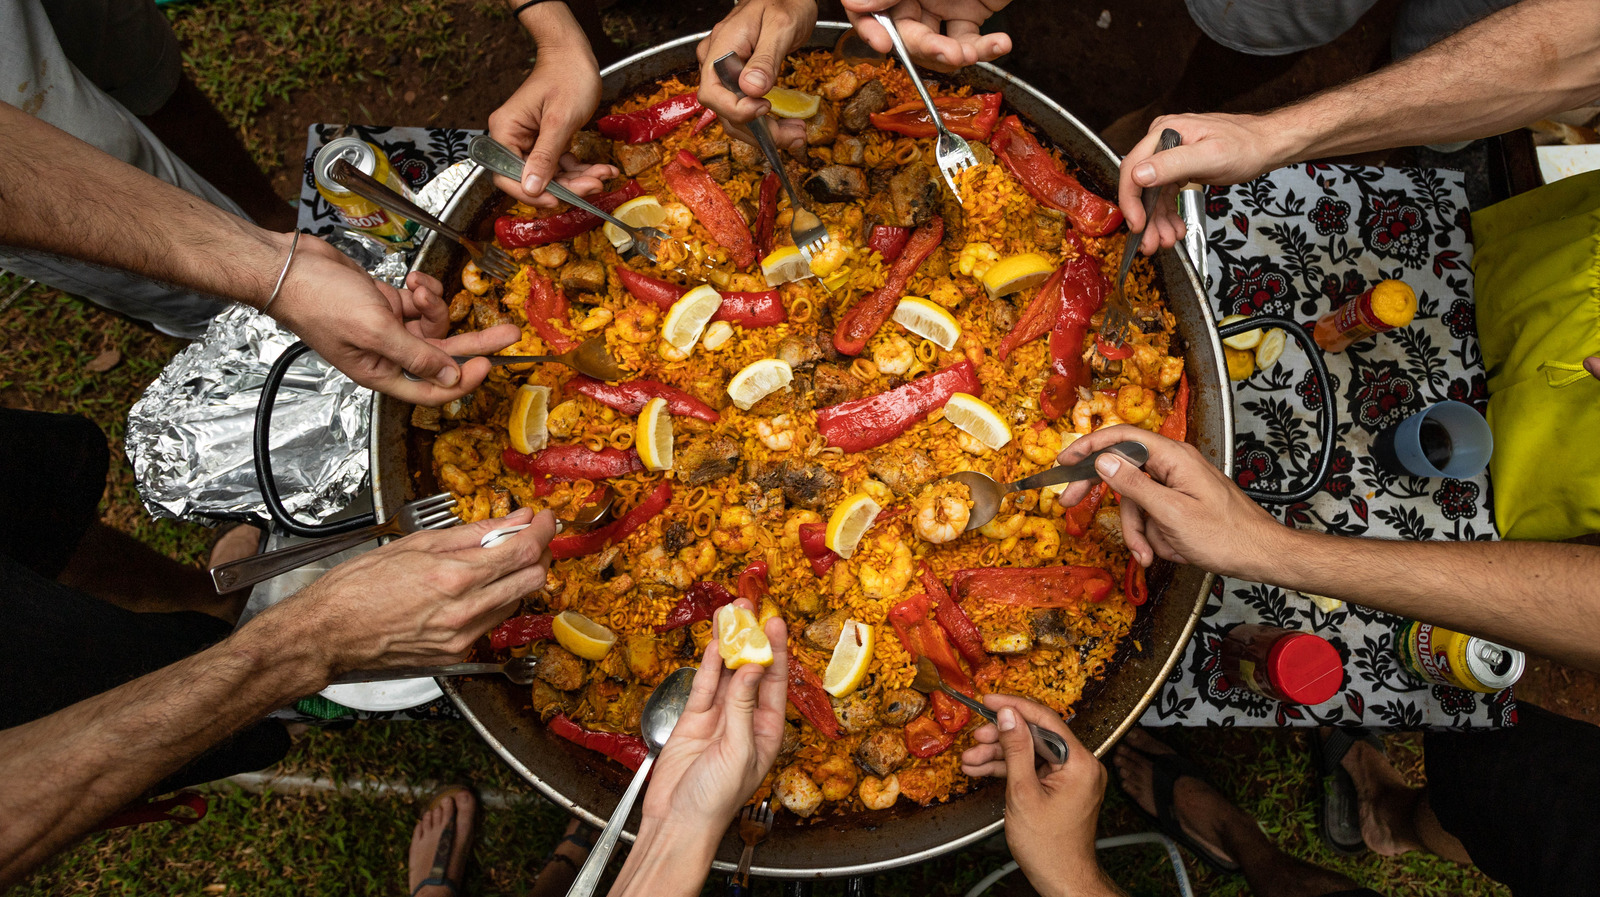 https://www.mashed.com/img/gallery/mistakes-everyone-makes-when-making-paella/l-intro-1650570890.jpg